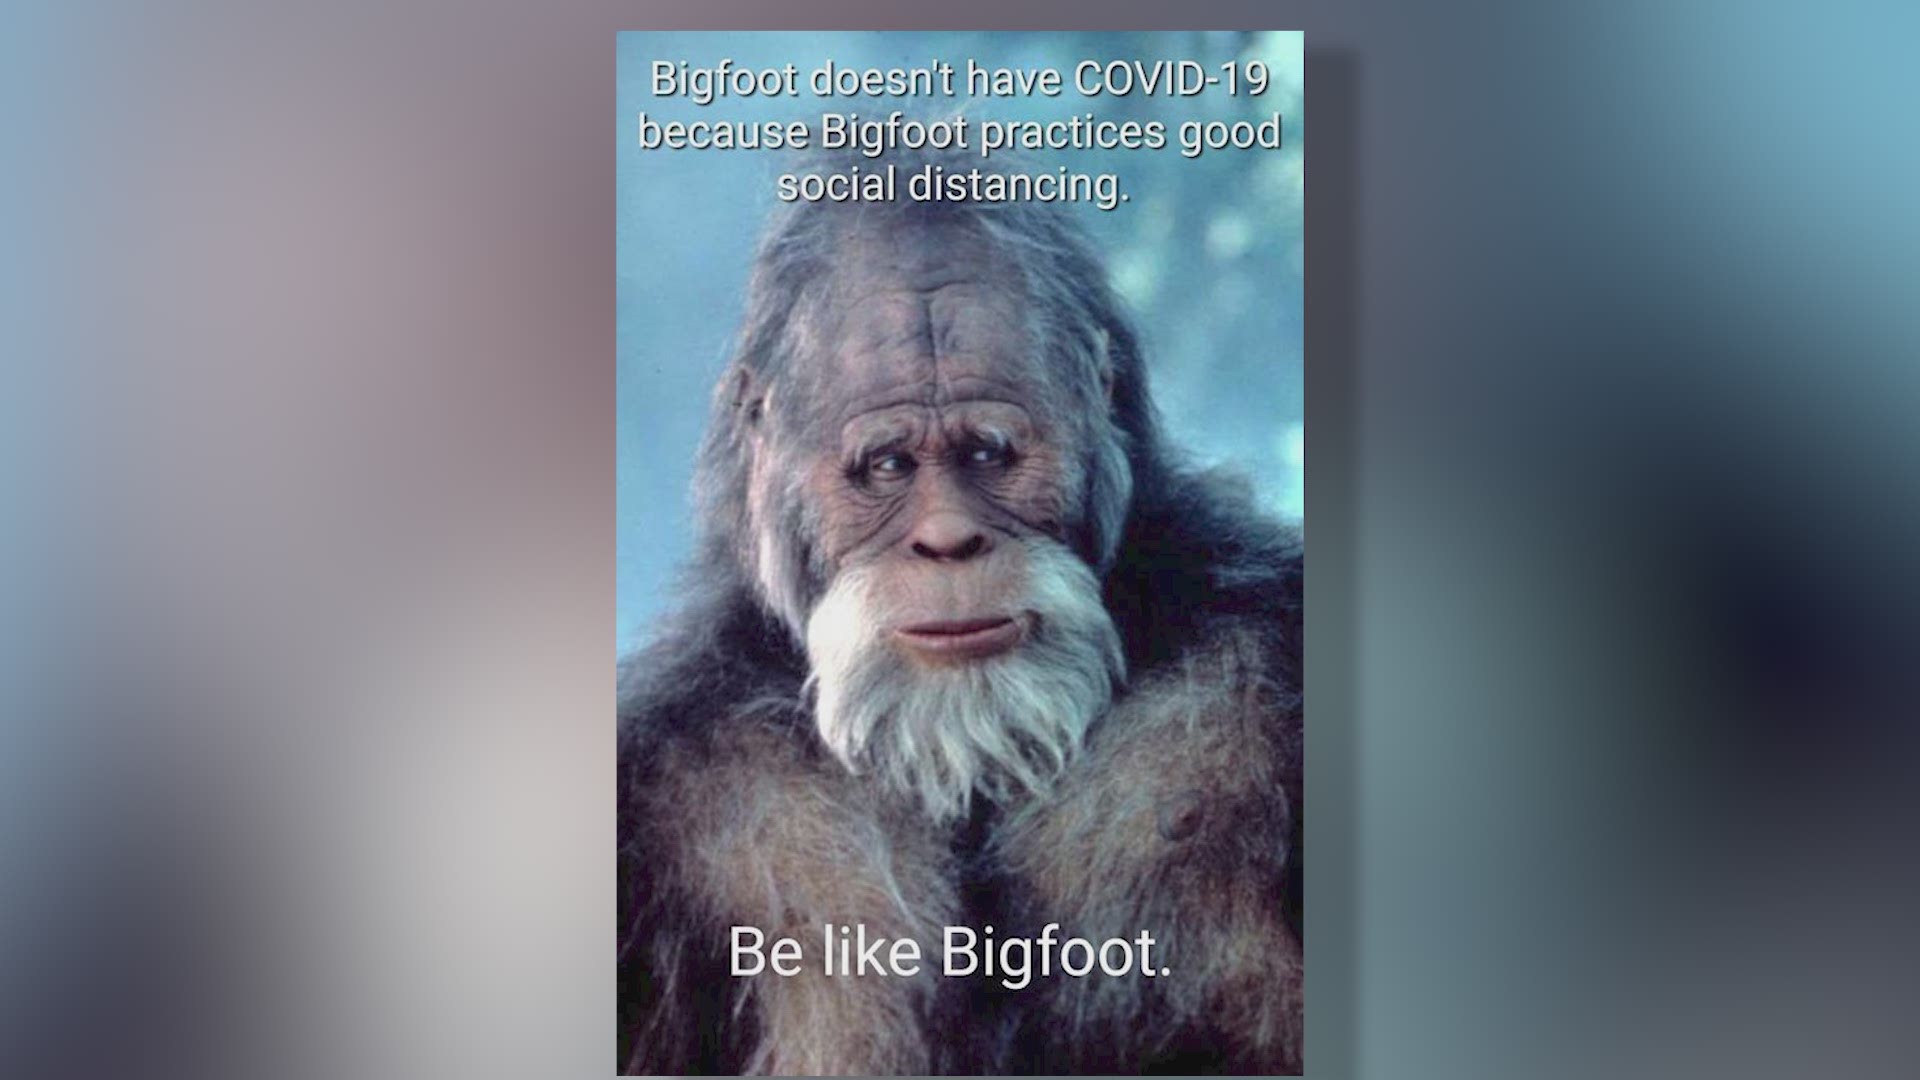 COVID-19 quarantine was lonely and isolating. Then Bigfoot stepped in.